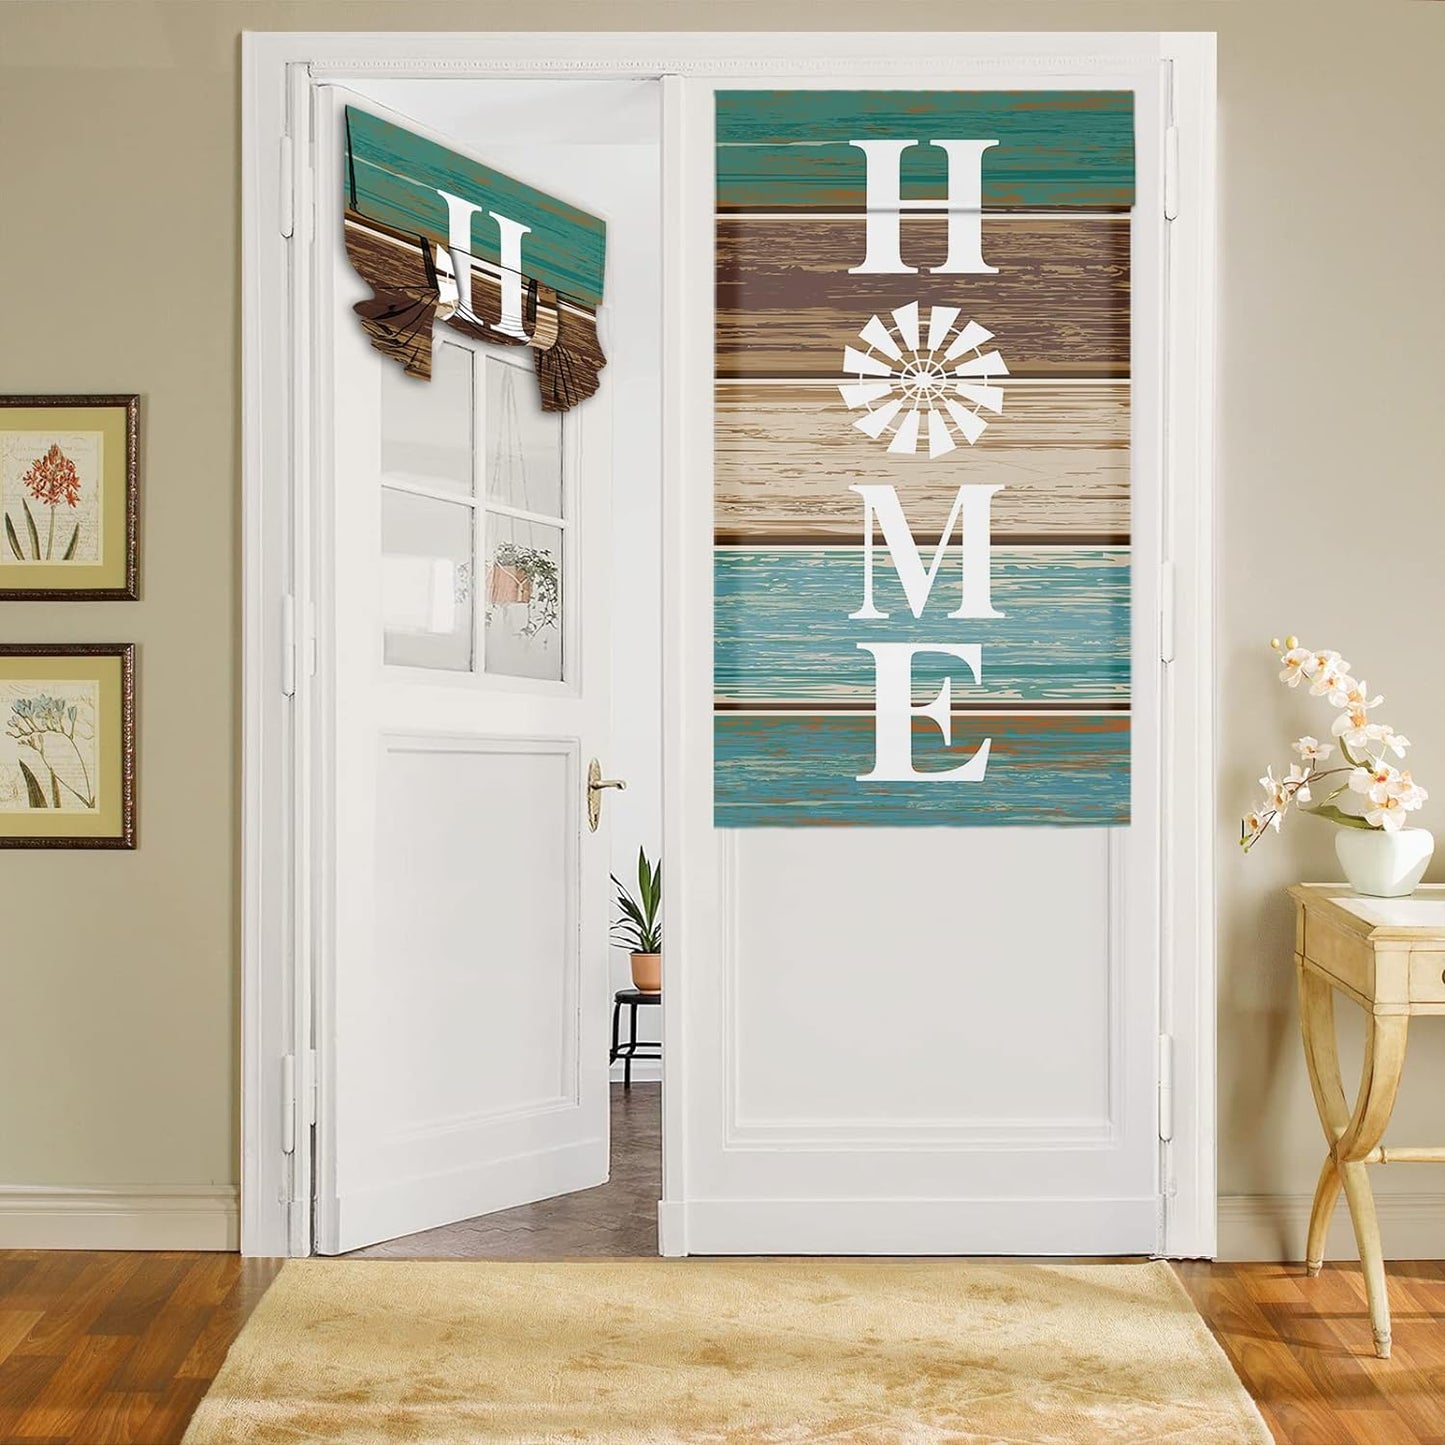 BEMIGO Door Curtains for Door Windows, Vintage Wooden Door Window Curtains for French Glass Door, Privacy Thermal Insulated Tie up Door Shades, Farmhouse Colorful Small Window Curtains 26 X 42 Inch  BEMIGO Green Brown 42.00" X 26.00" 